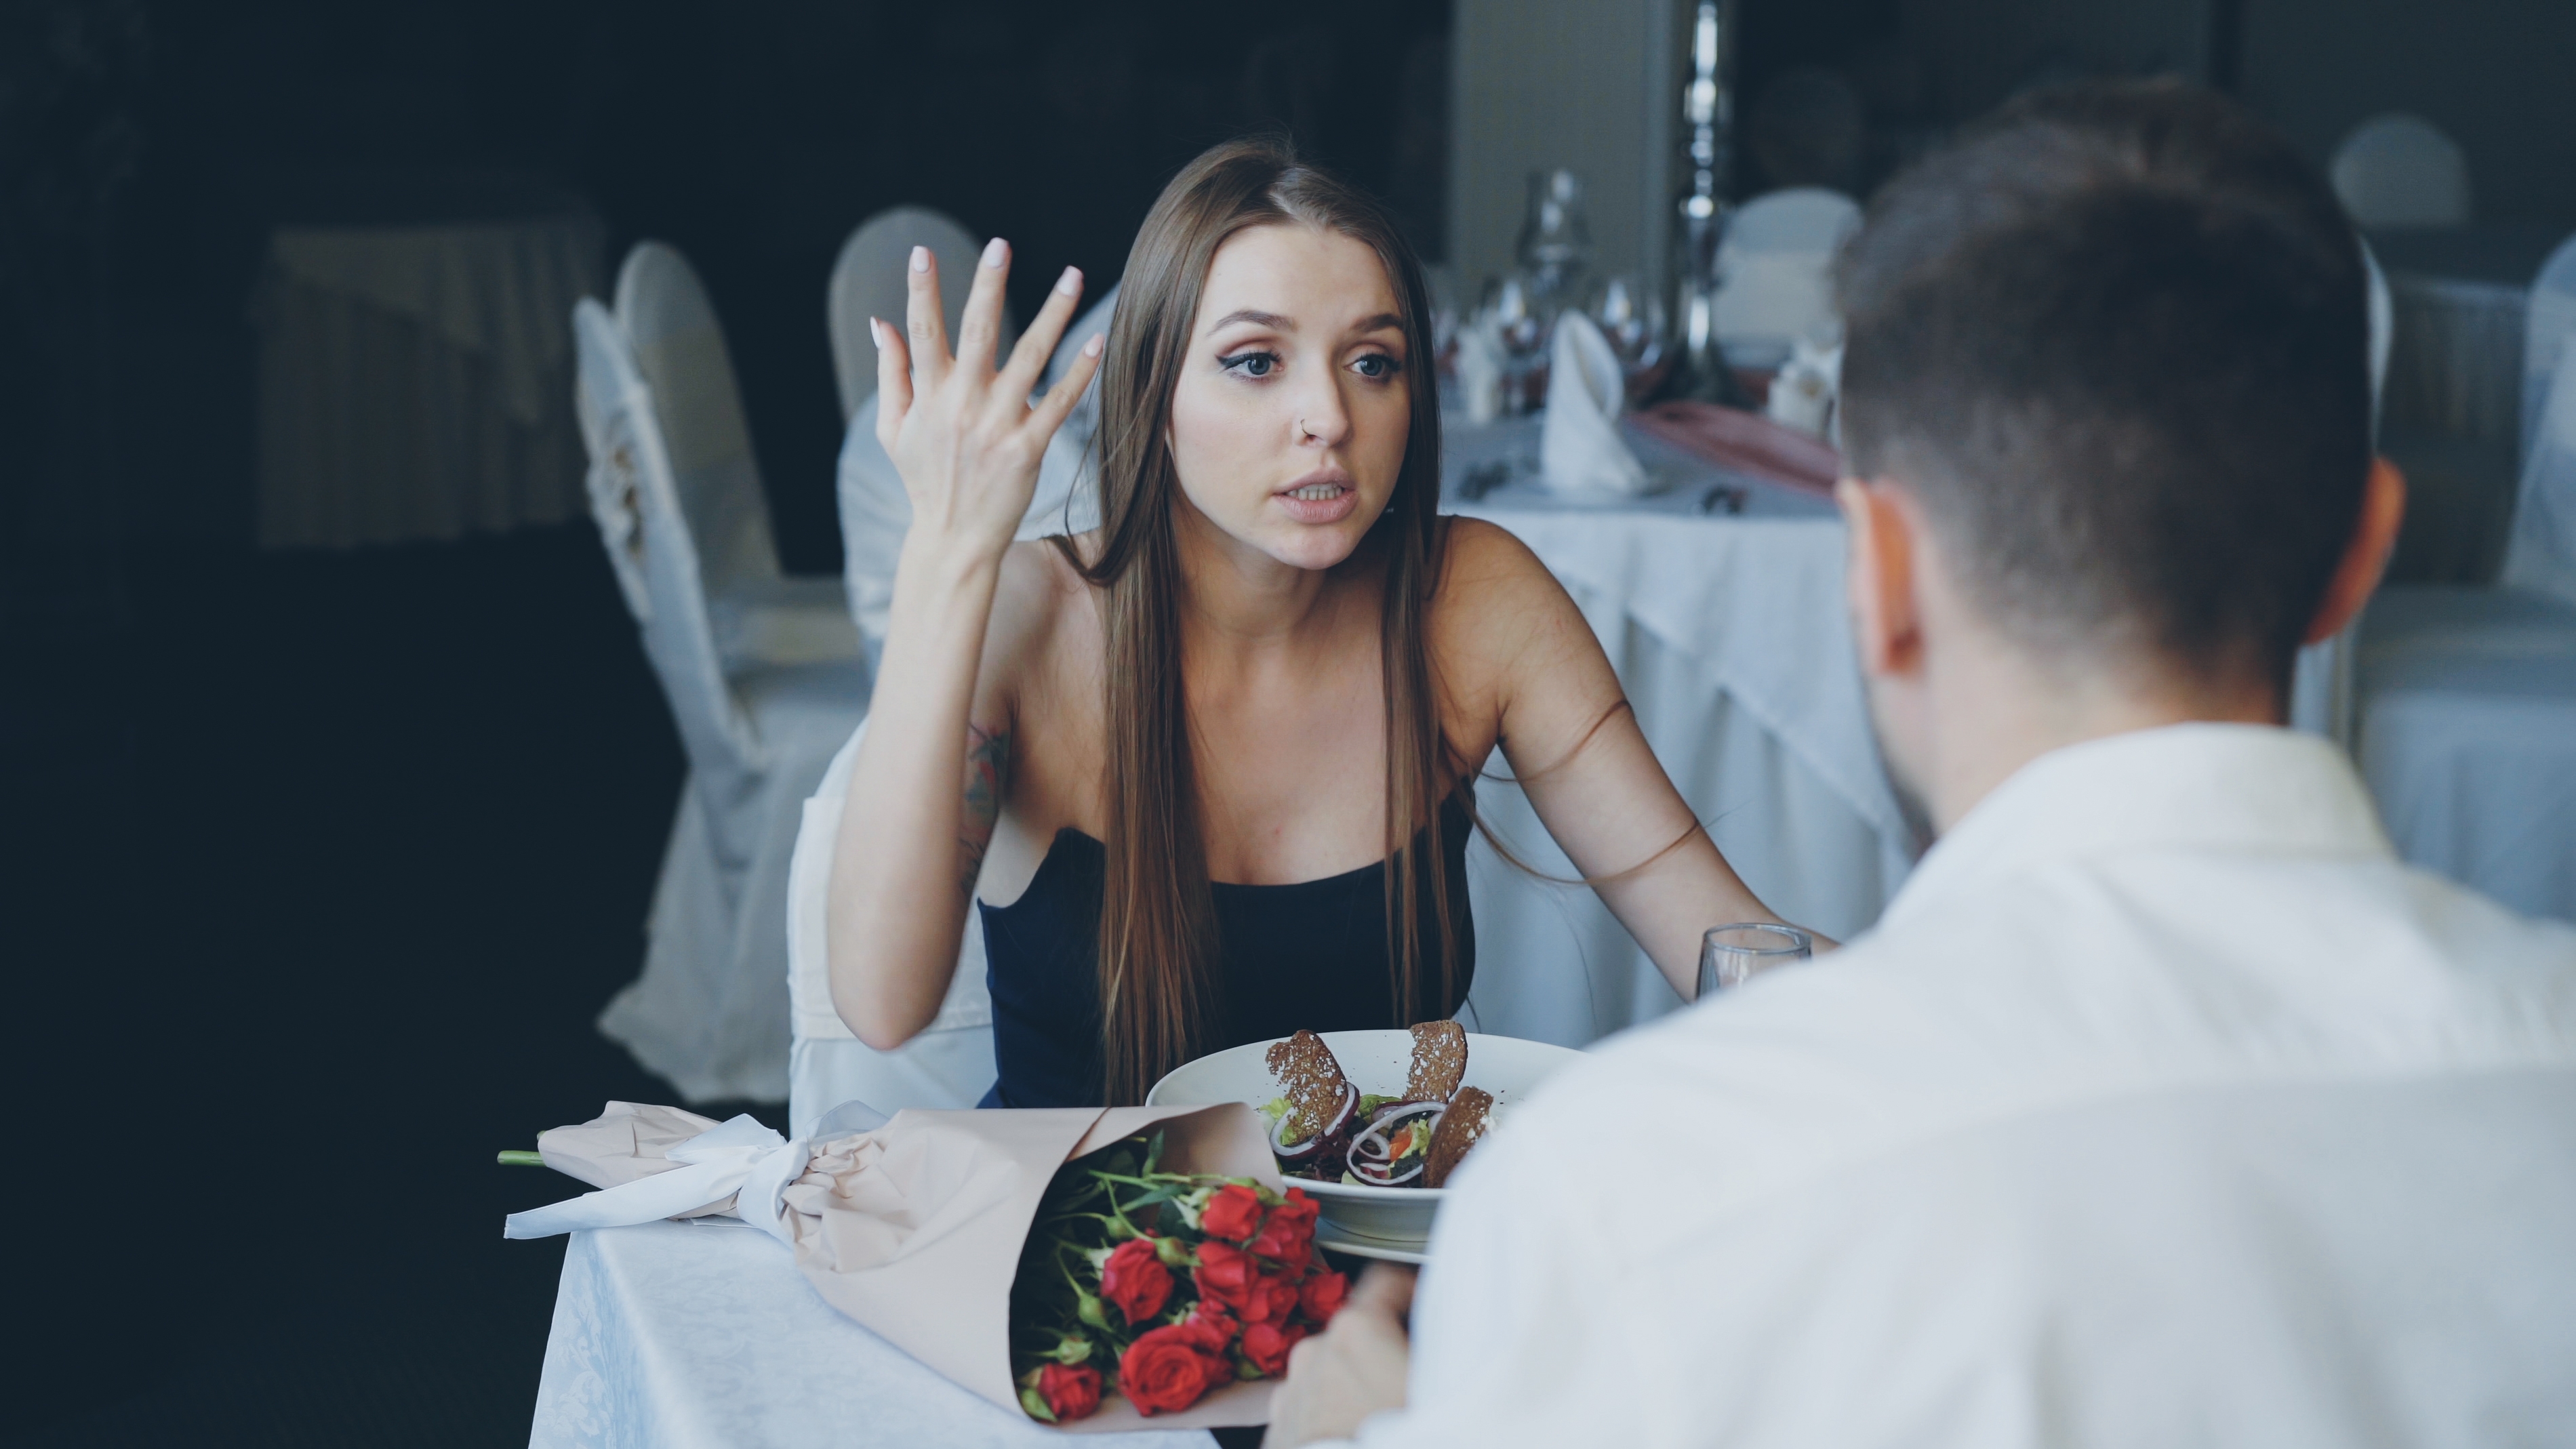 An angry woman arguing with her husband while dining in a restaurant | Source: Shutterstock